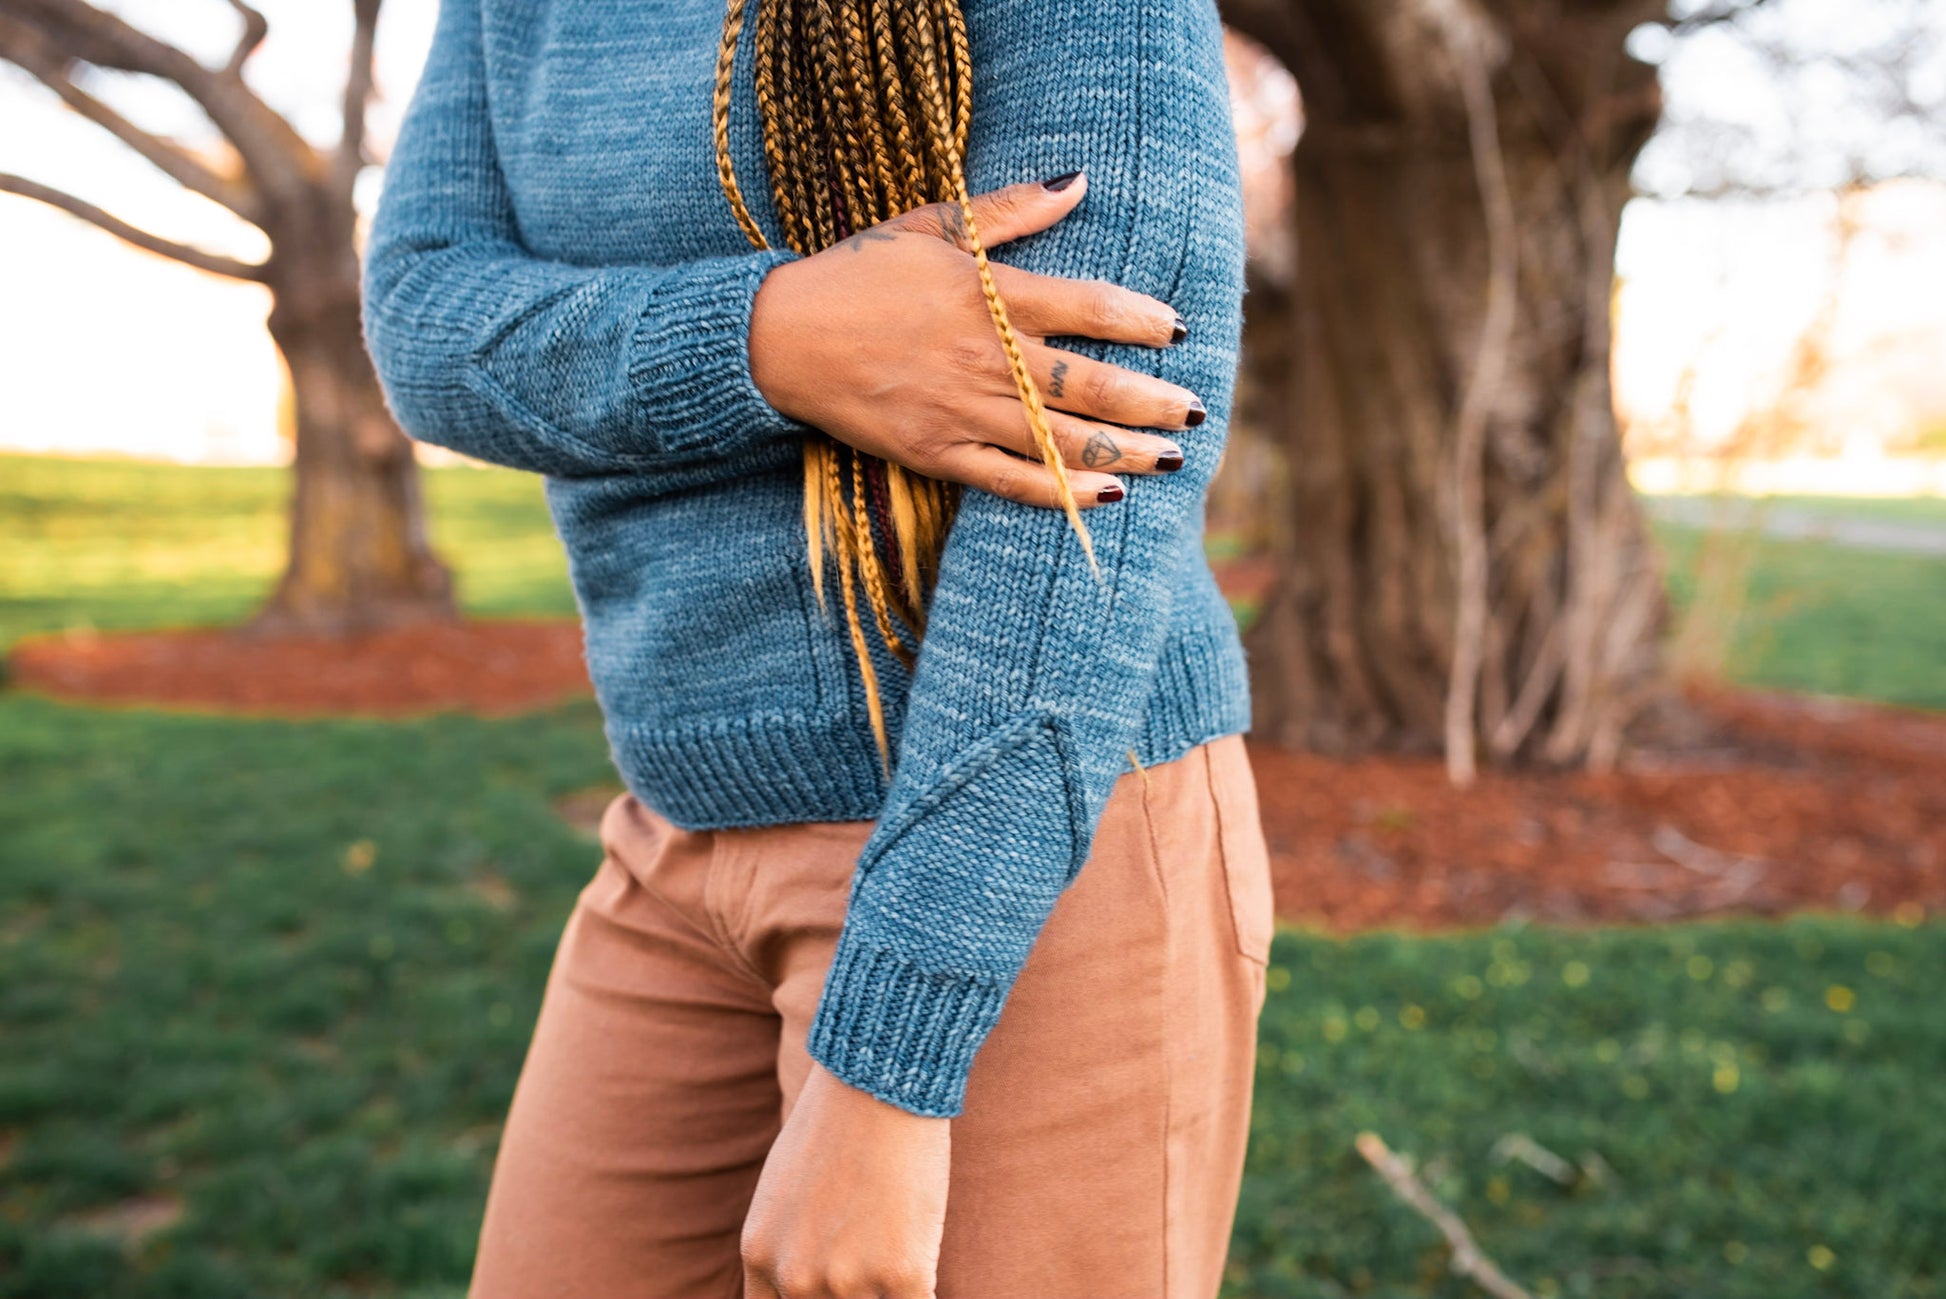 Seen from the shoulder's down, Rachel stands in a park wearing a hand knit blue sweater with pink pants. The sweater has subtle cable details around the cuffs.